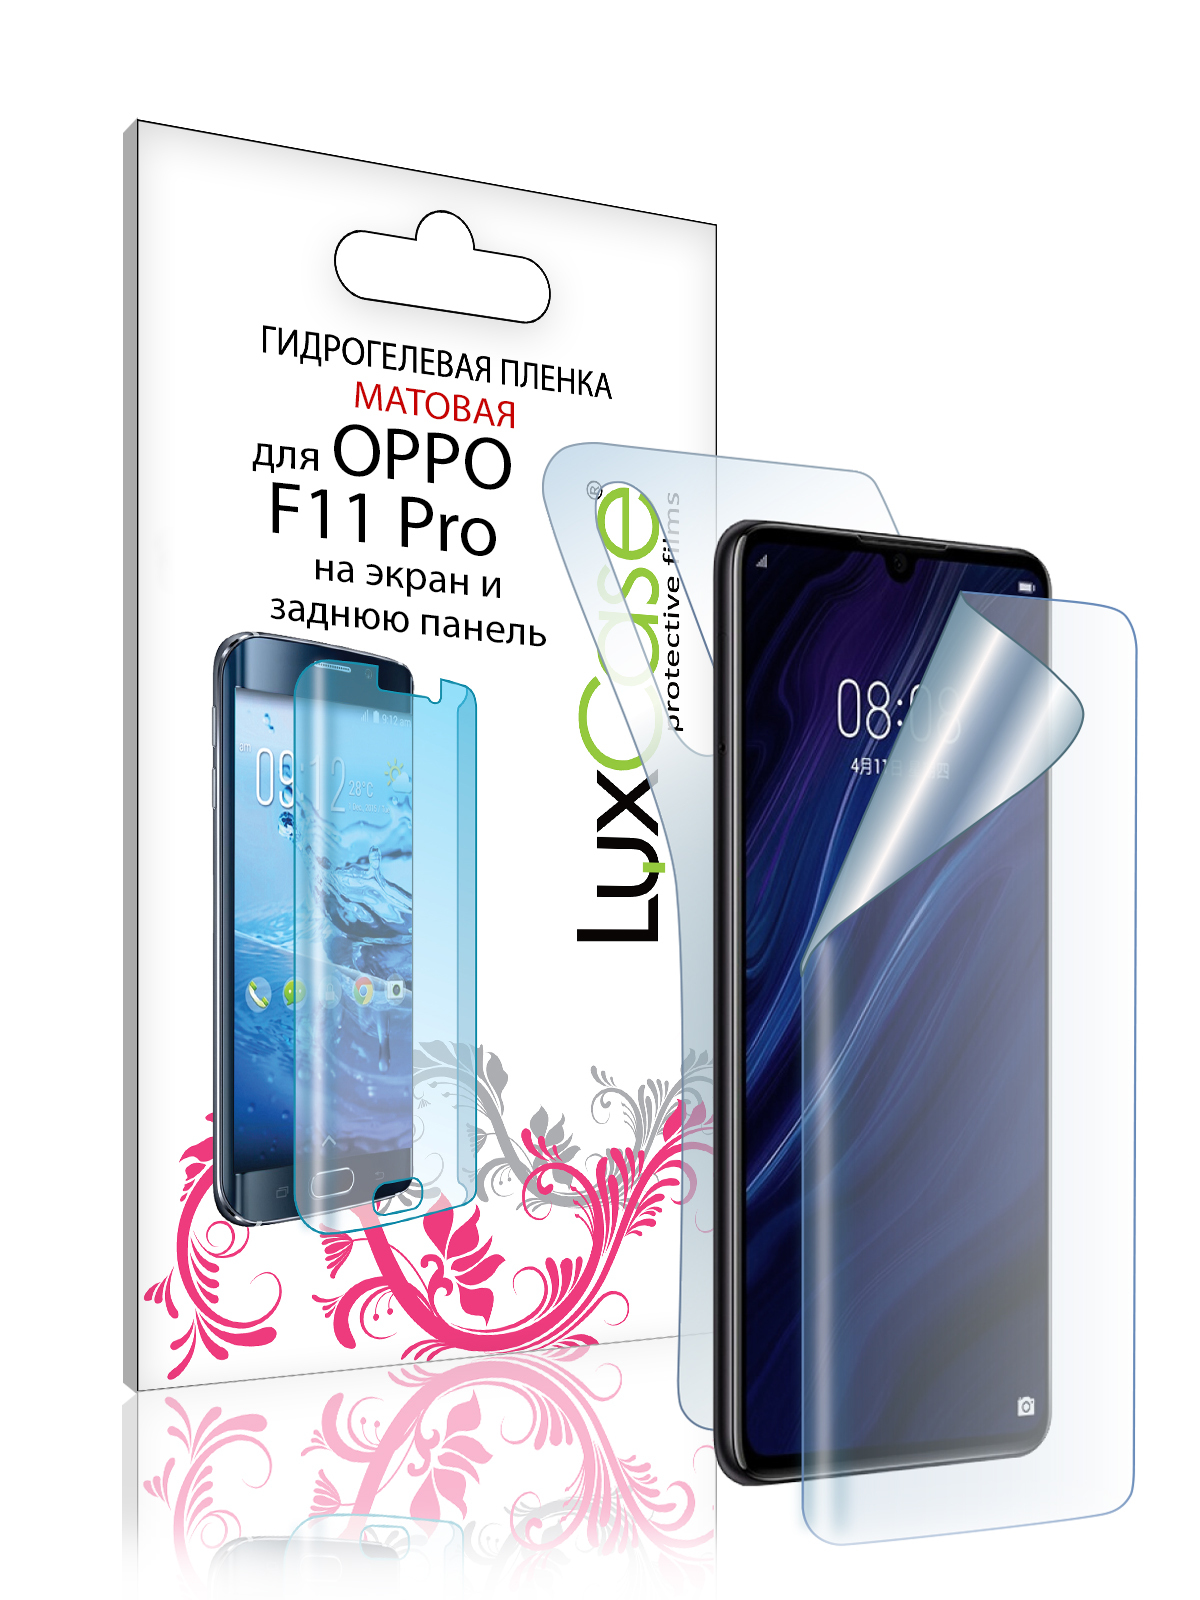 Пленка гидрогелевая LuxCase для Oppo F11 Pro 0.14mm Front and Back Matte 86776 гидрогелевая пленка luxcase для oppo f11 pro 0 14mm front and back matte 86776